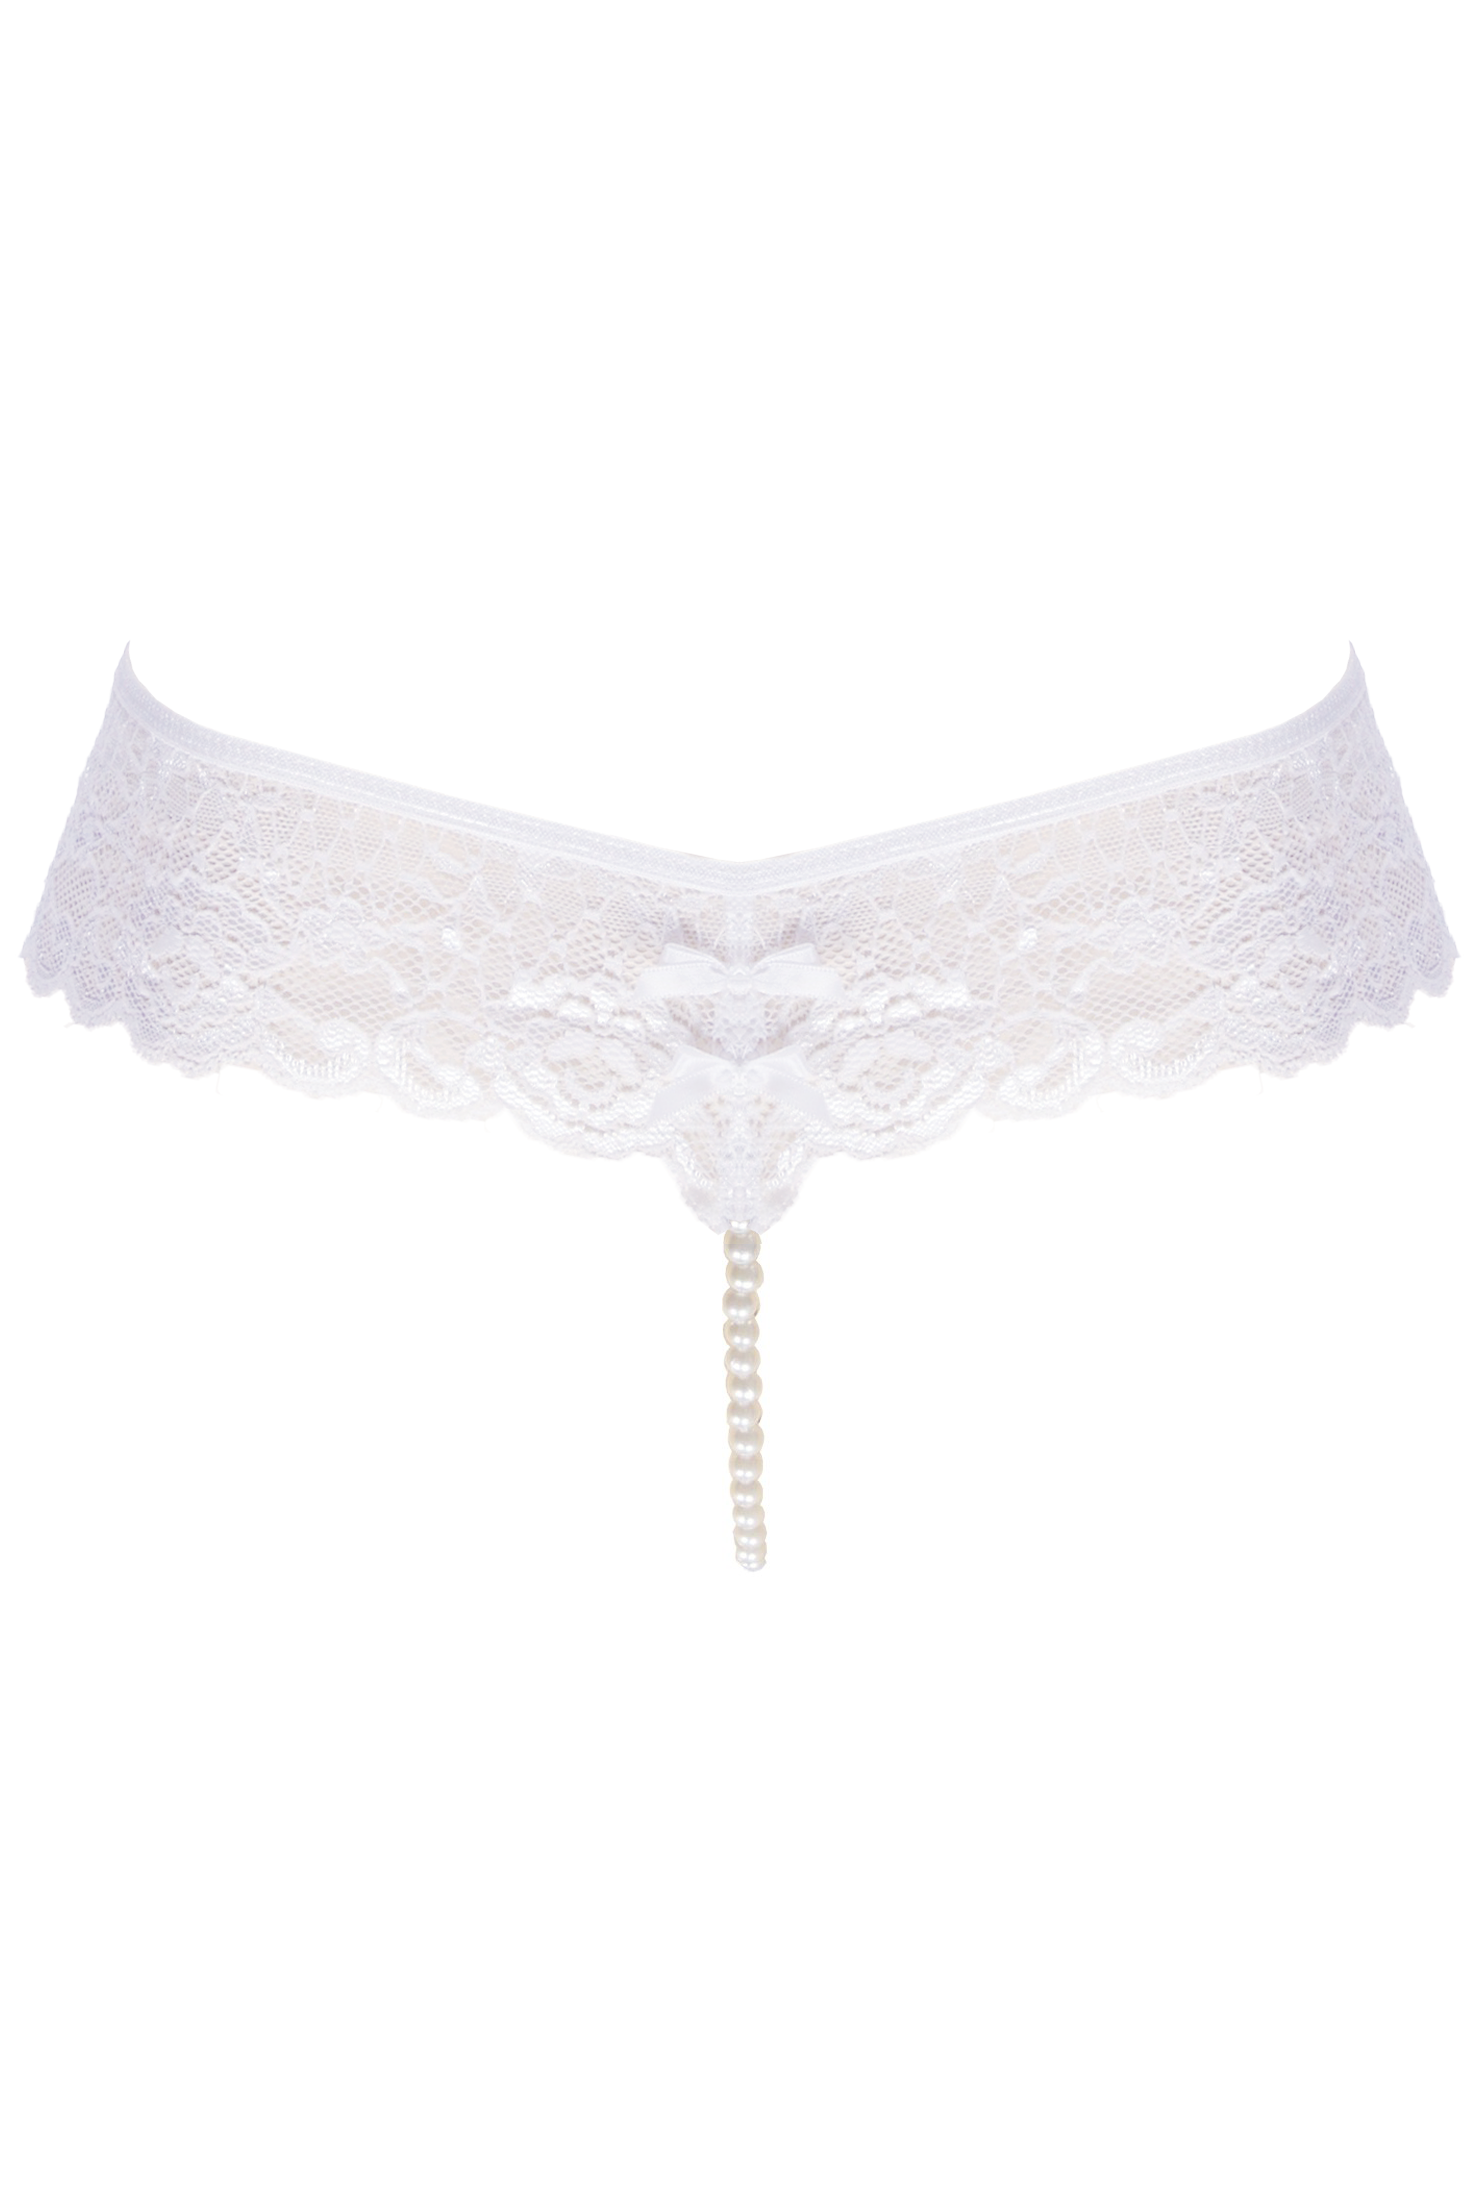 LOVE & LACE WHITE LACE PEARL THONG | Lingerie Letters